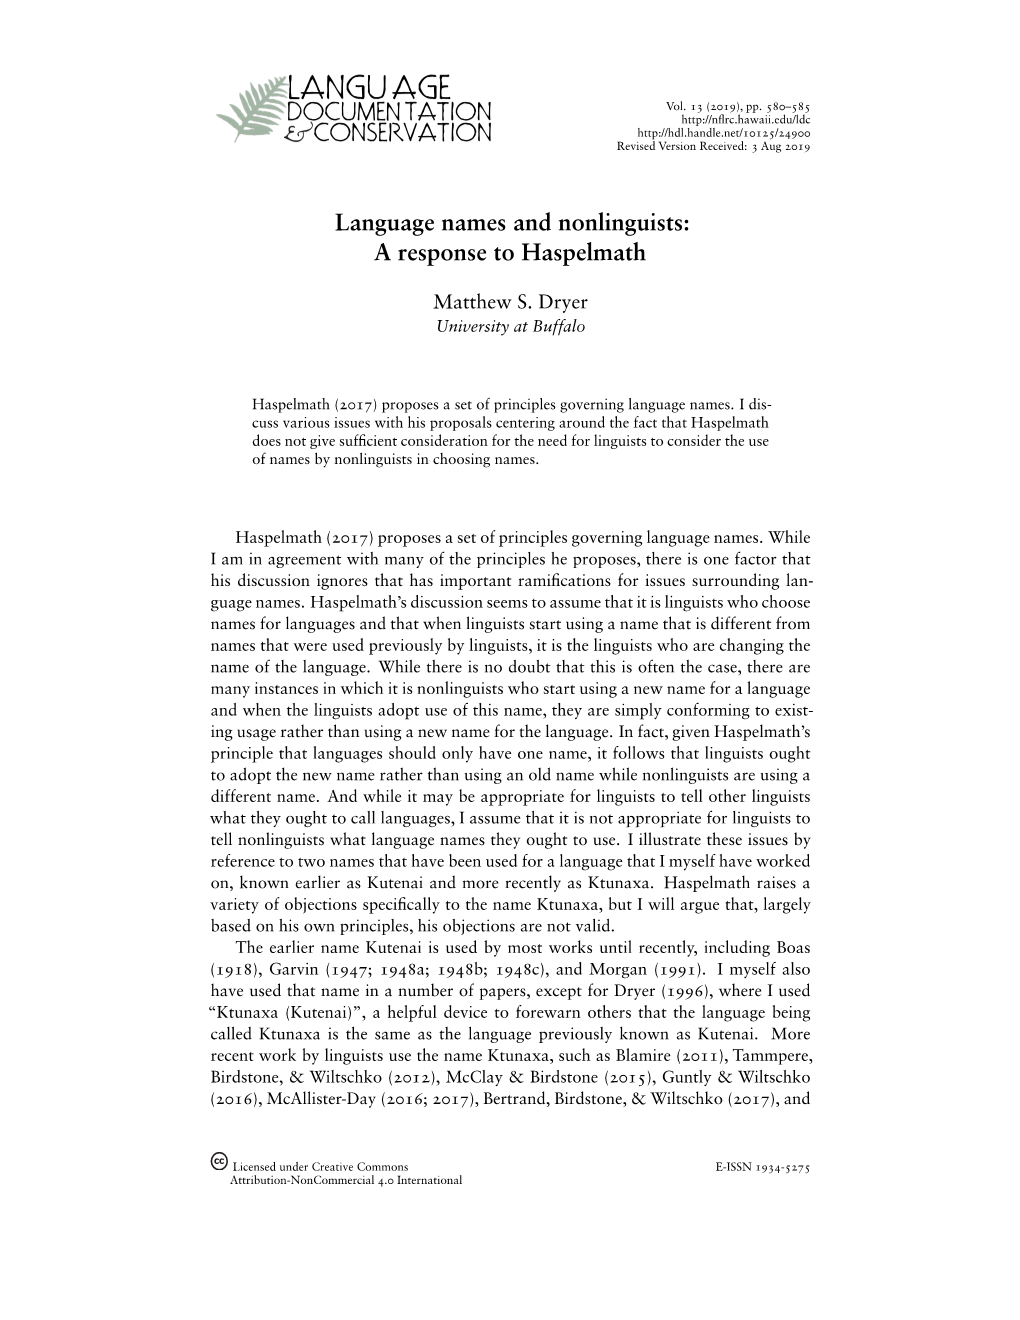 Language Names and Nonlinguists: a Response to Haspelmath